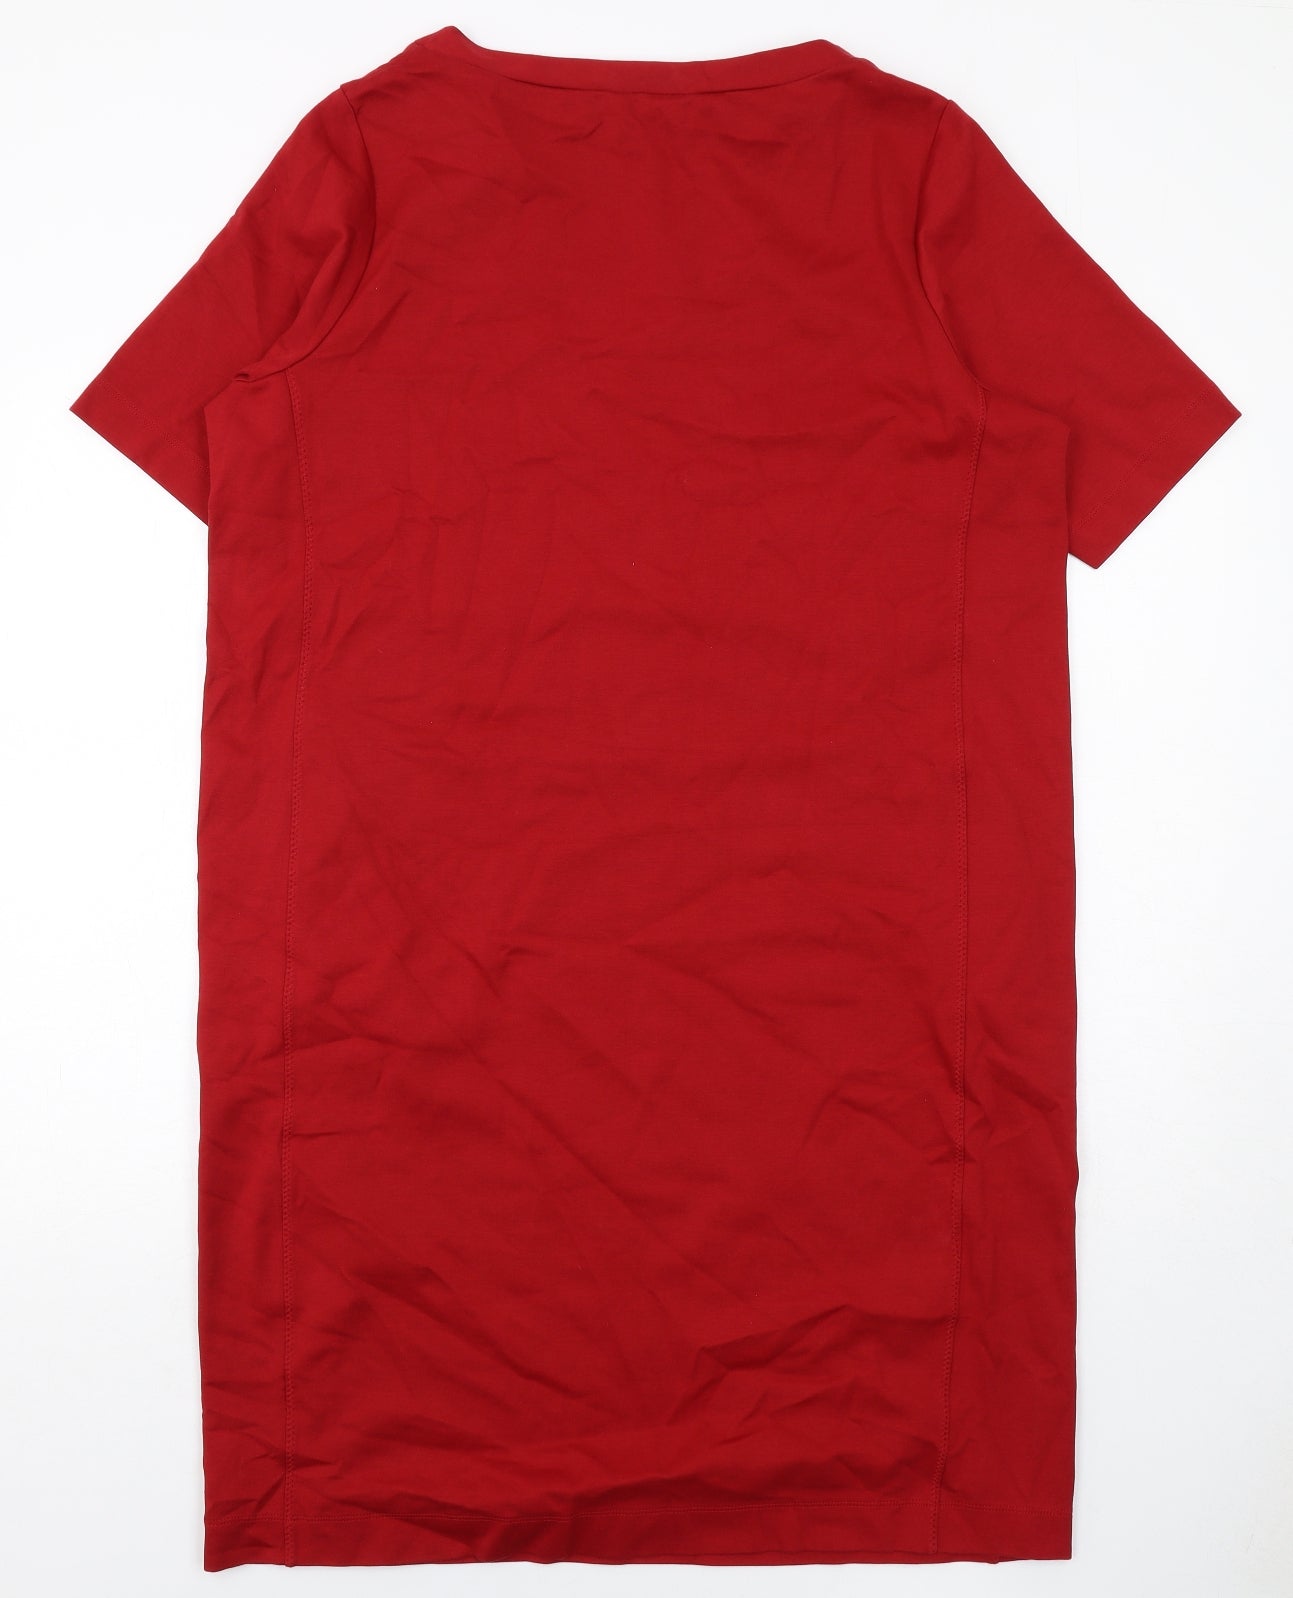 Carolyn Donnelly Womens Red Cotton T-Shirt Dress Size 16 V-Neck Pullover